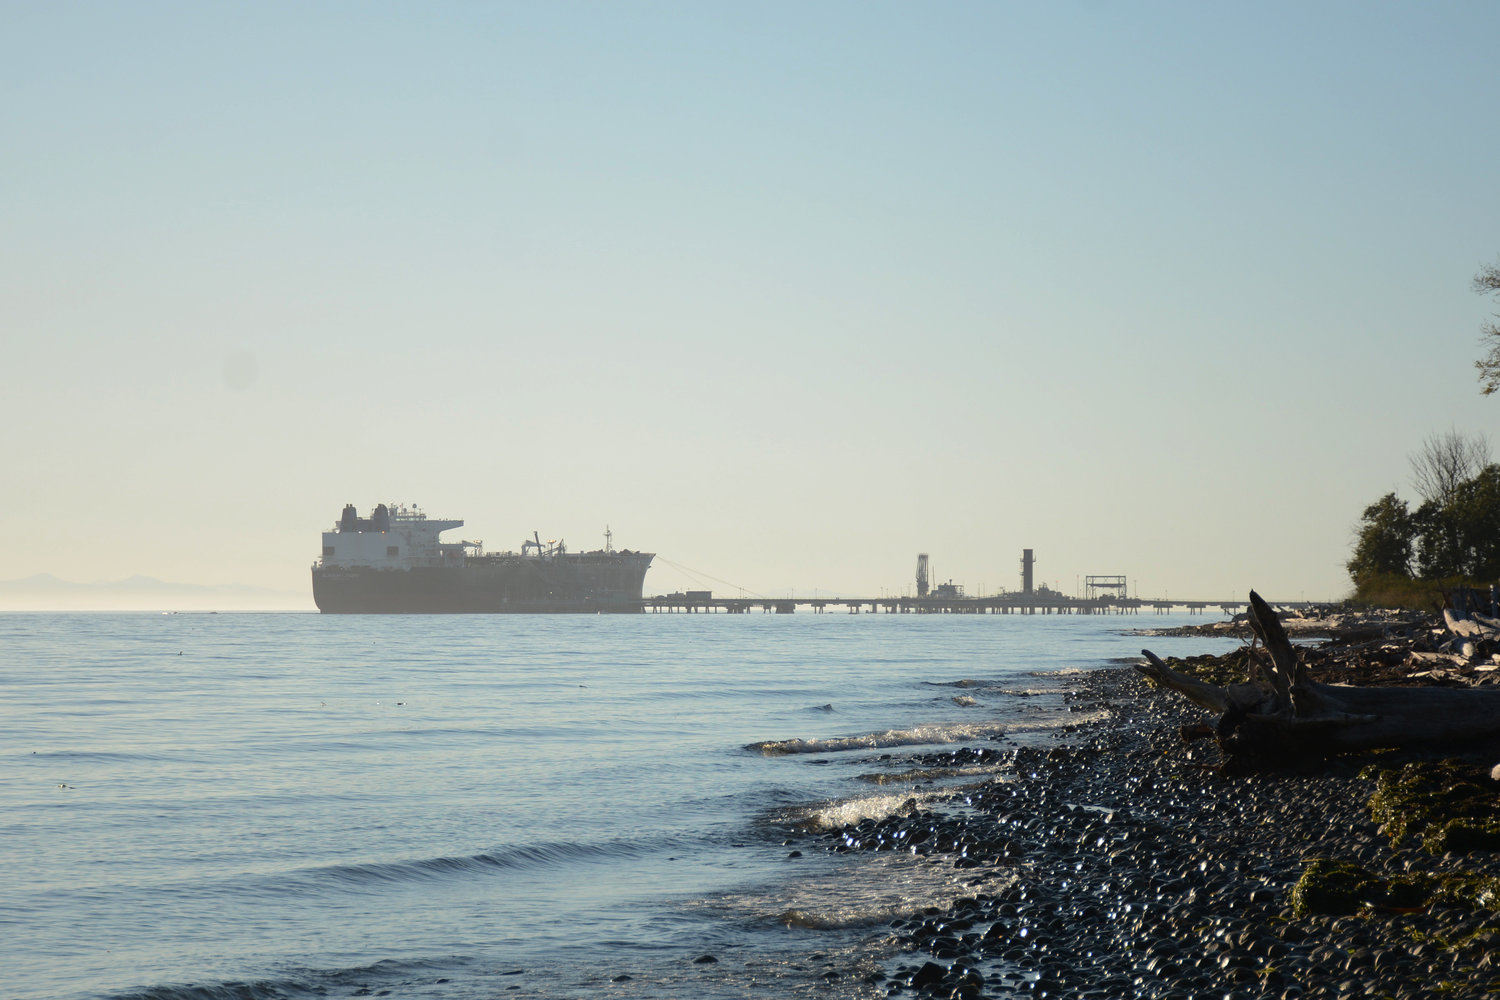 A vessel moored at the south wing of BP’s Cherry Point dock as seen from the beach along Gulf Road on September 20.